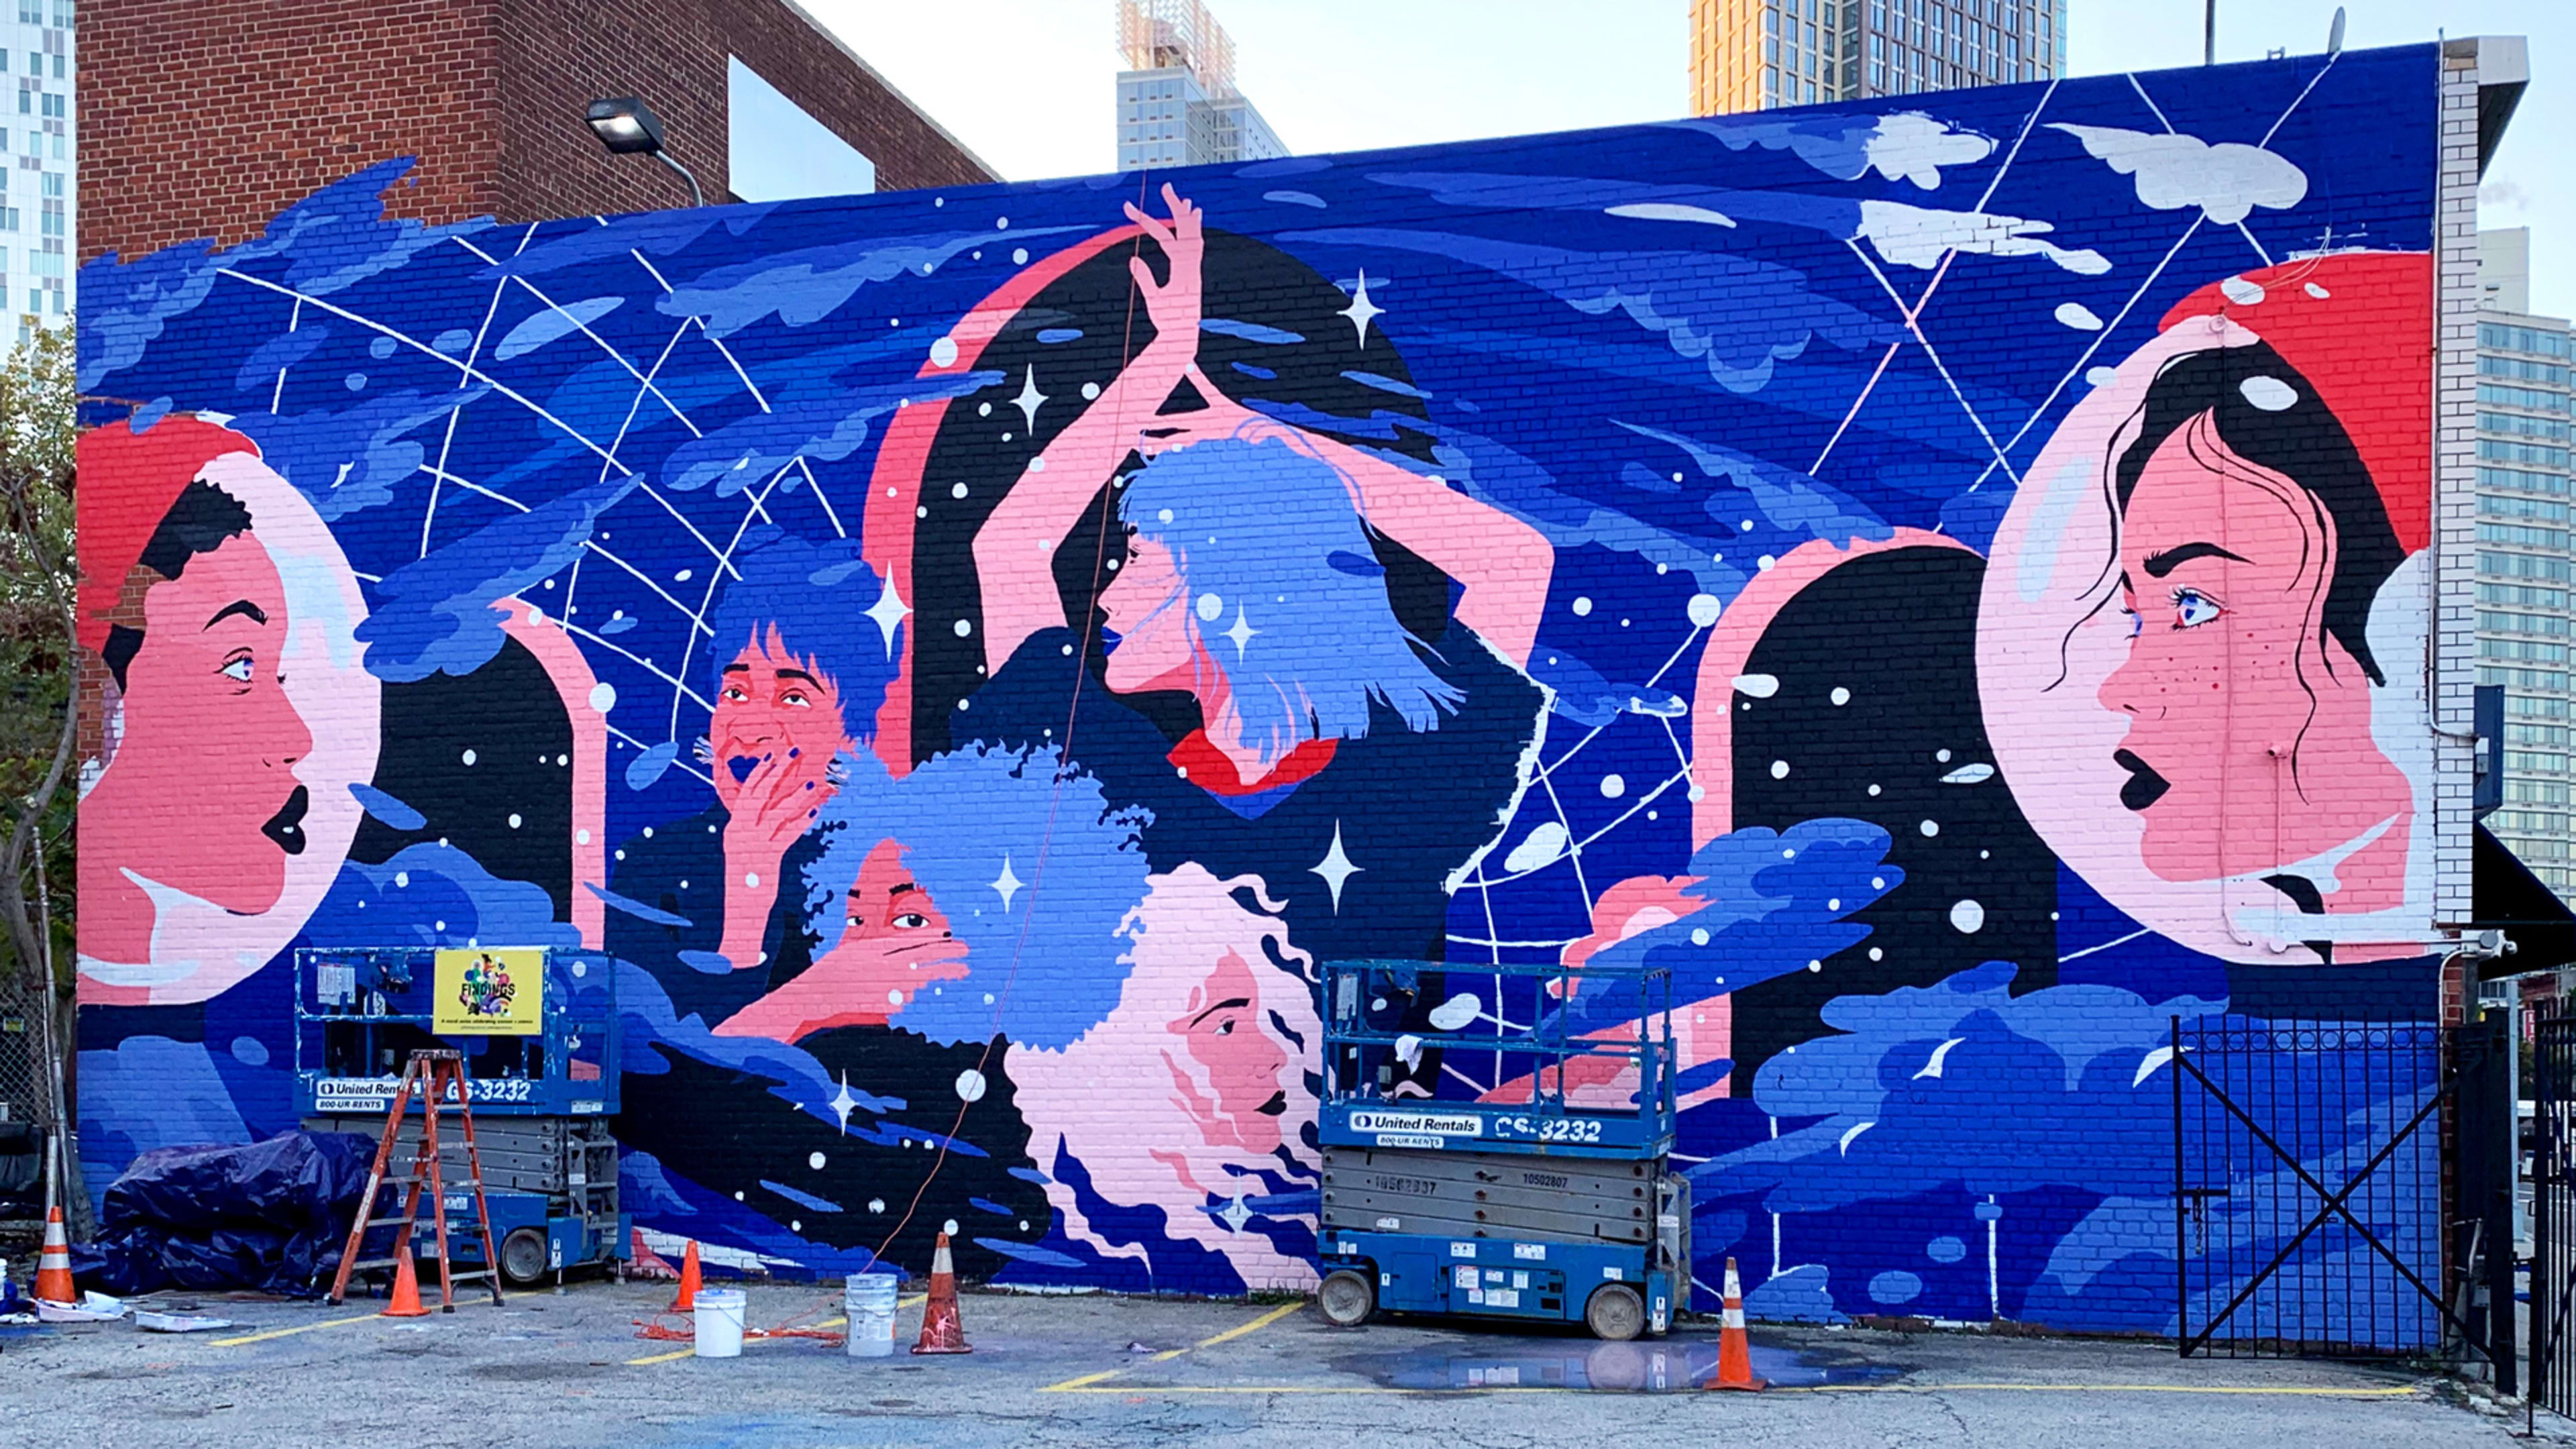 This stunning high-tech mural uses AR to celebrate badass women in science